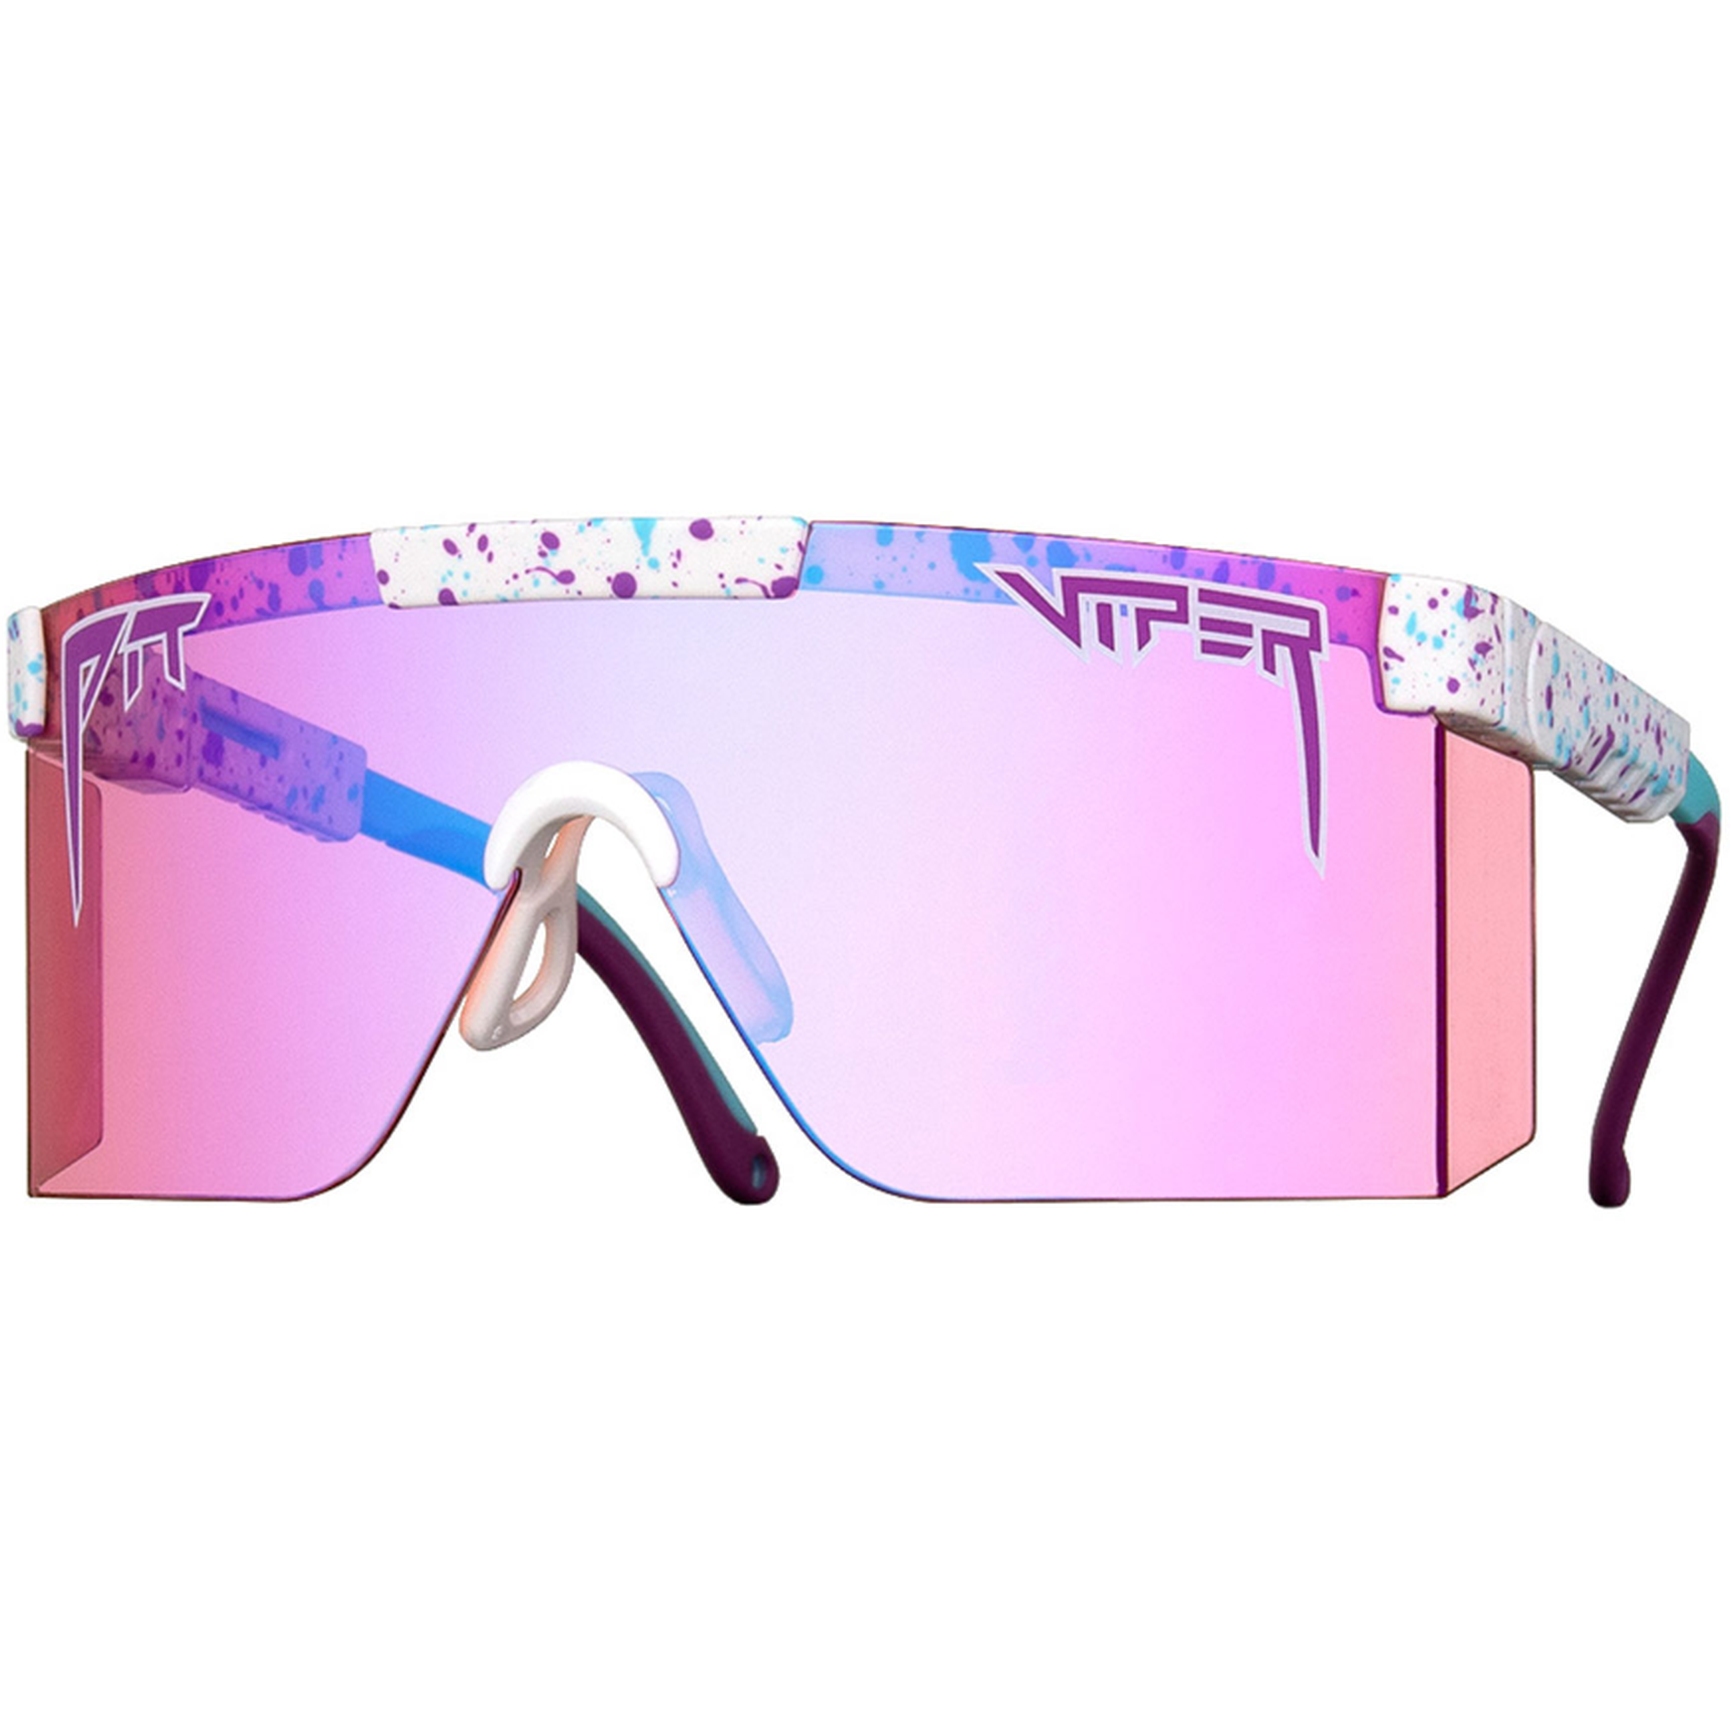 Picture of Pit Viper The Intimidators Glasses - The Jetski Climax / Purple Mirror